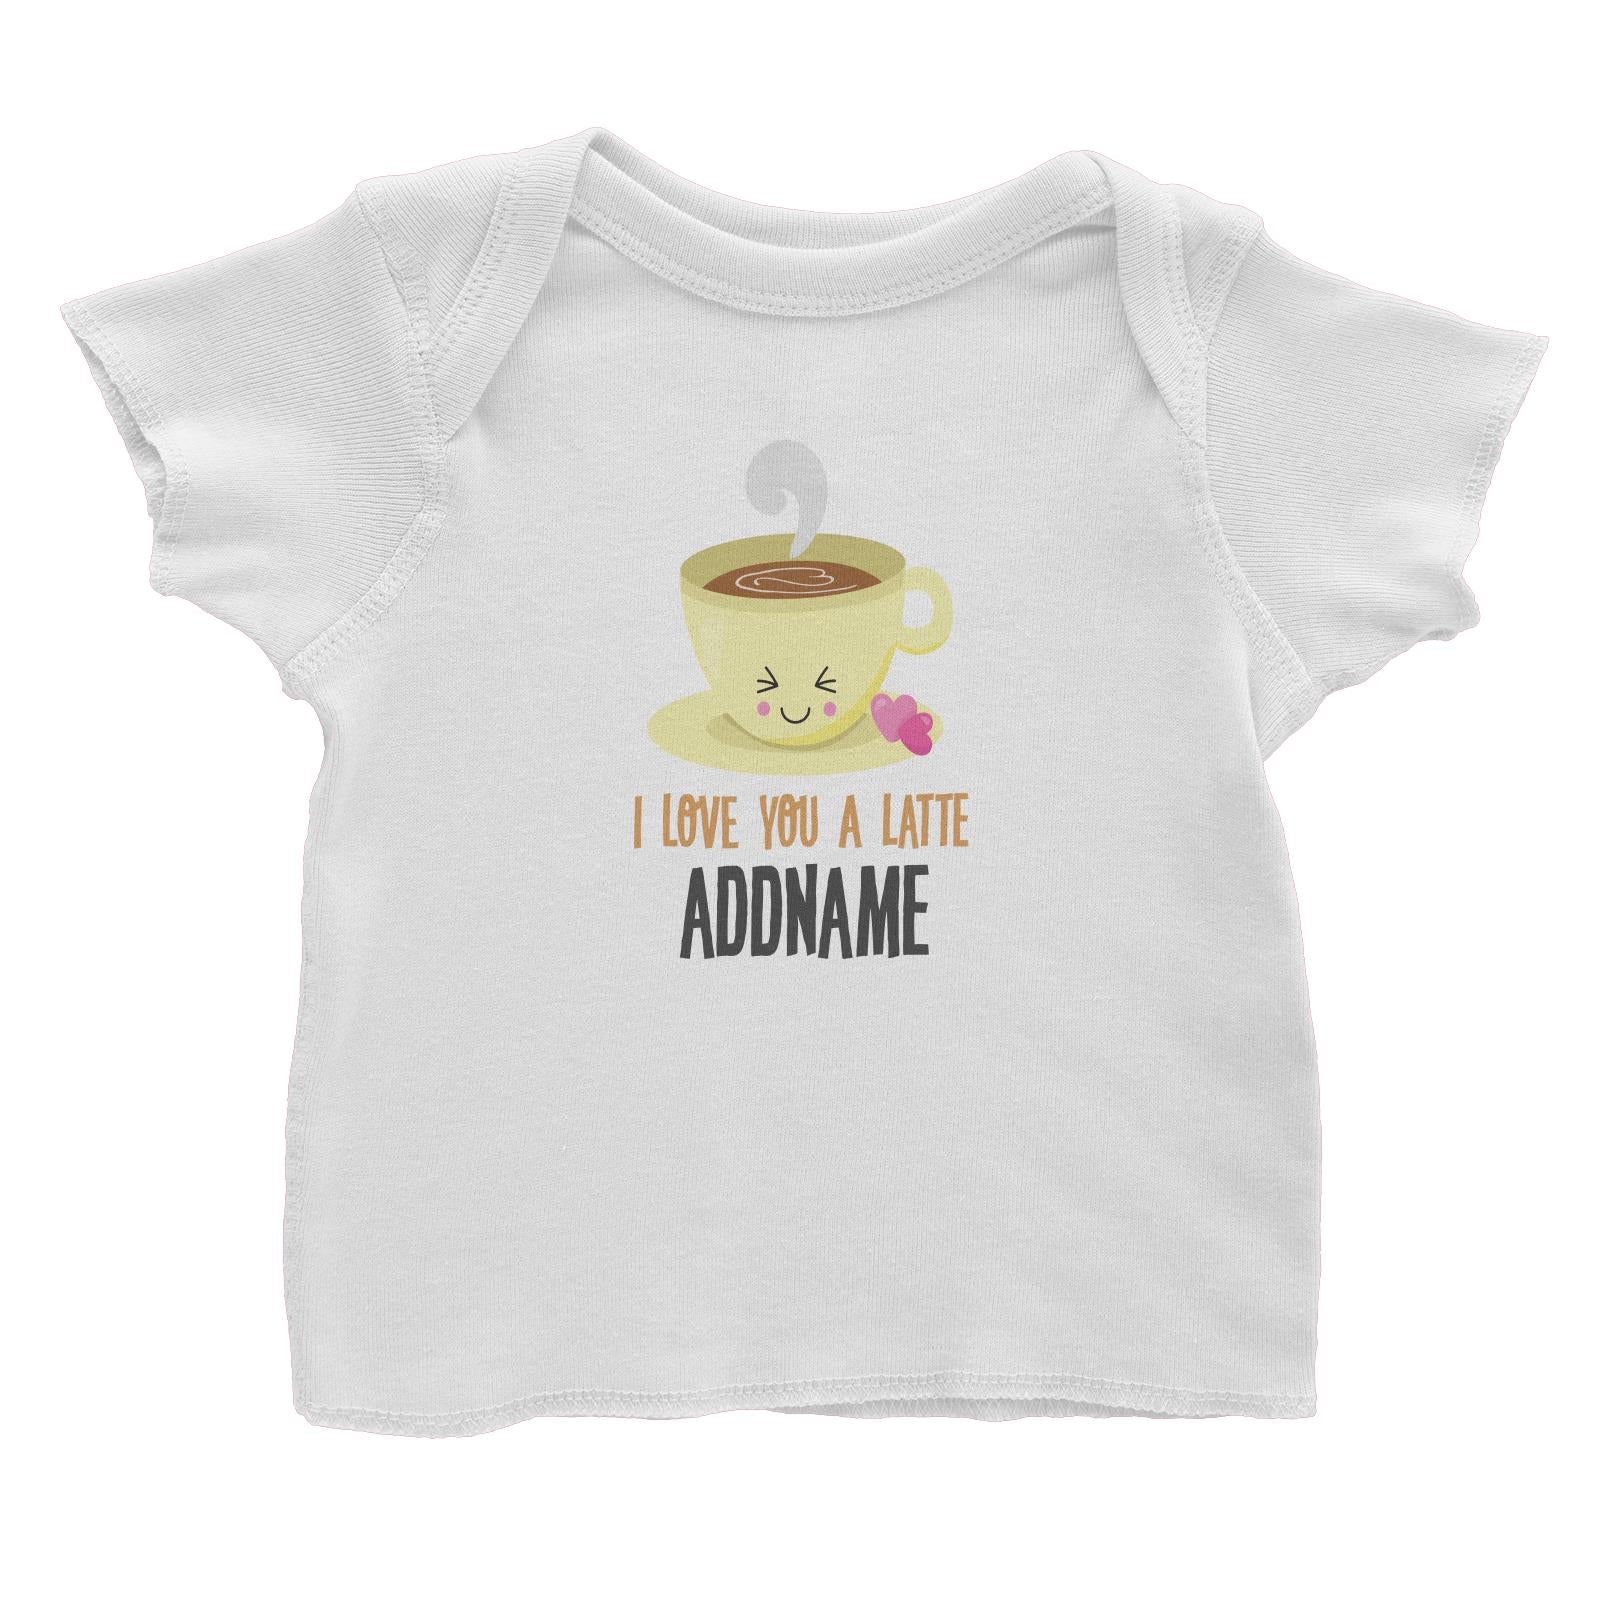 Love Food Puns I Love You A Latte Addname Baby T-Shirt